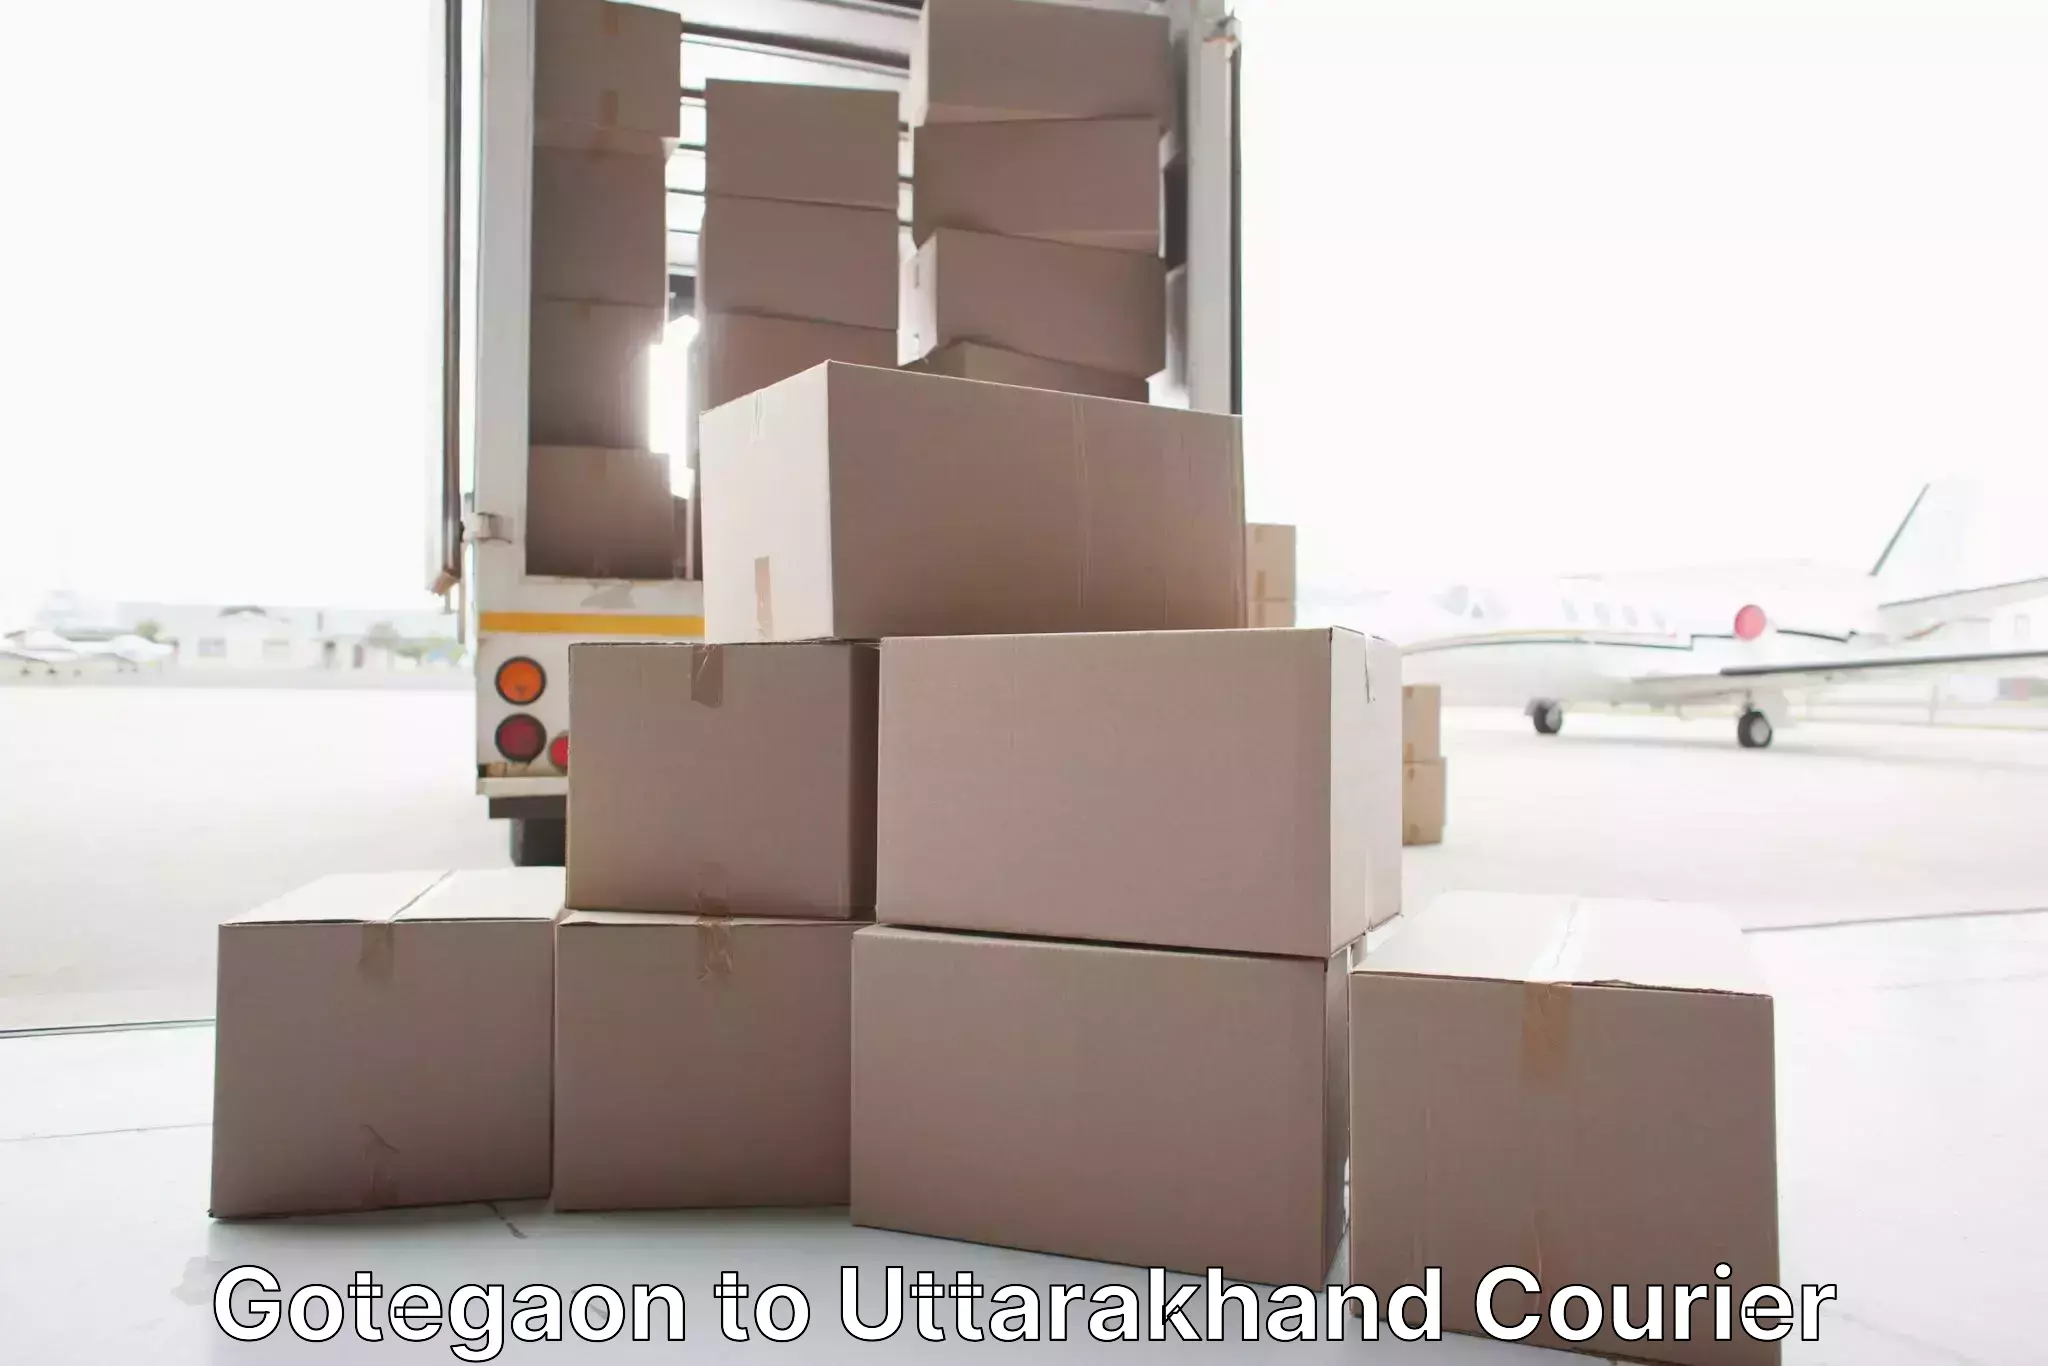 Long-distance moving services in Gotegaon to Uttarakhand